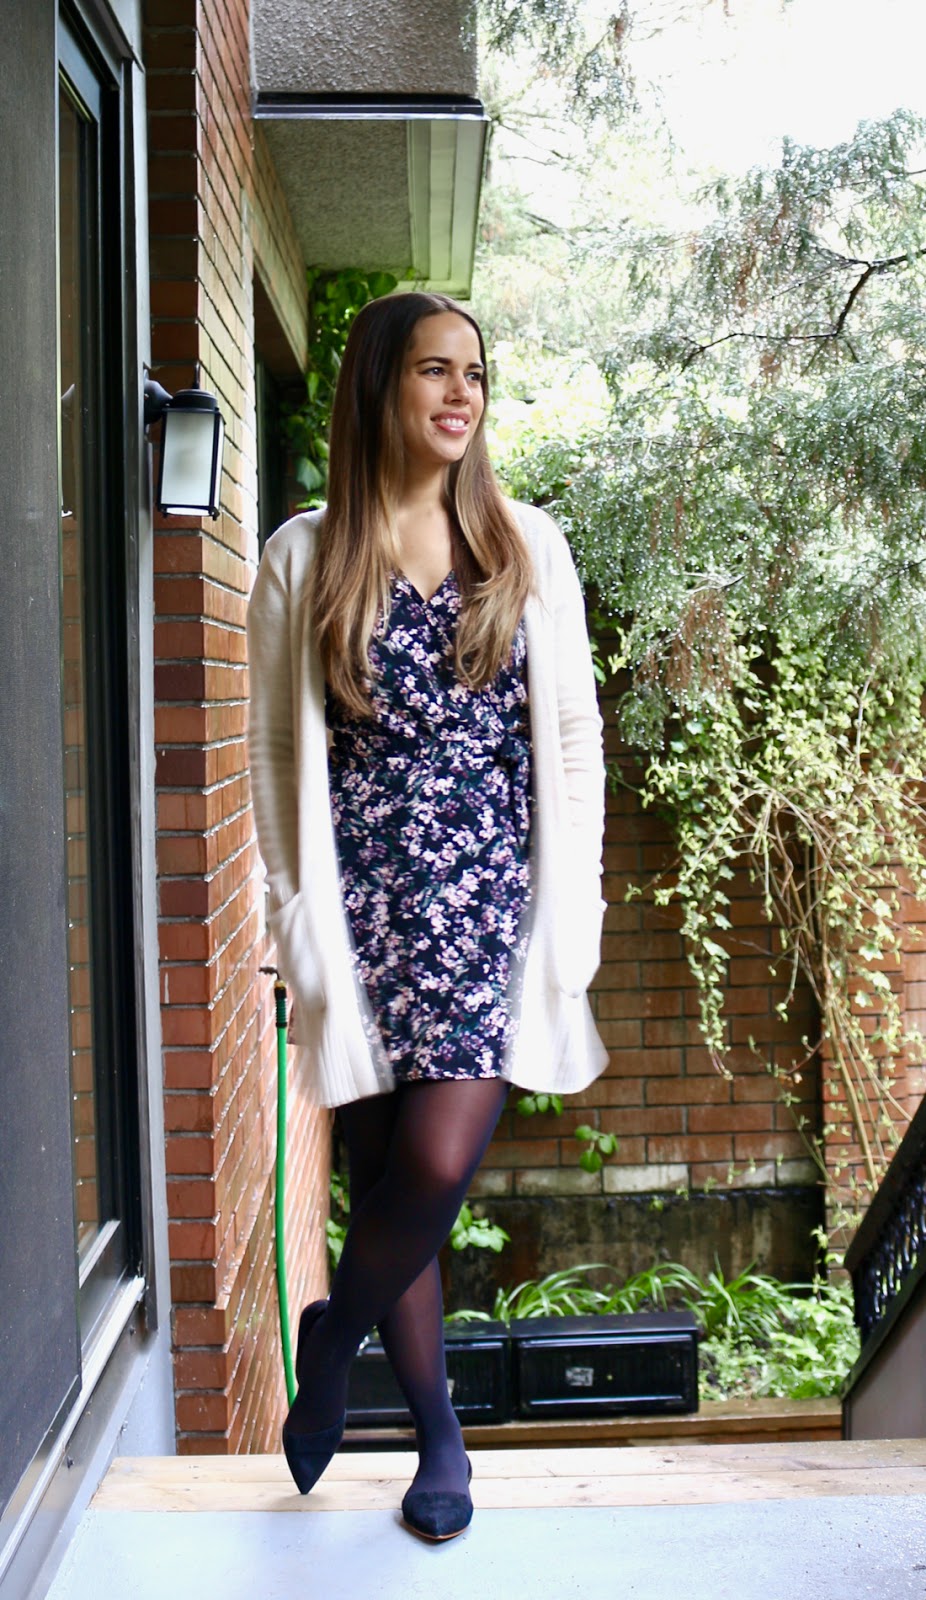 Jules in Flats - Floral Wrap Dress with Cardigan (Business Casual Spring Workwear on a Budget)